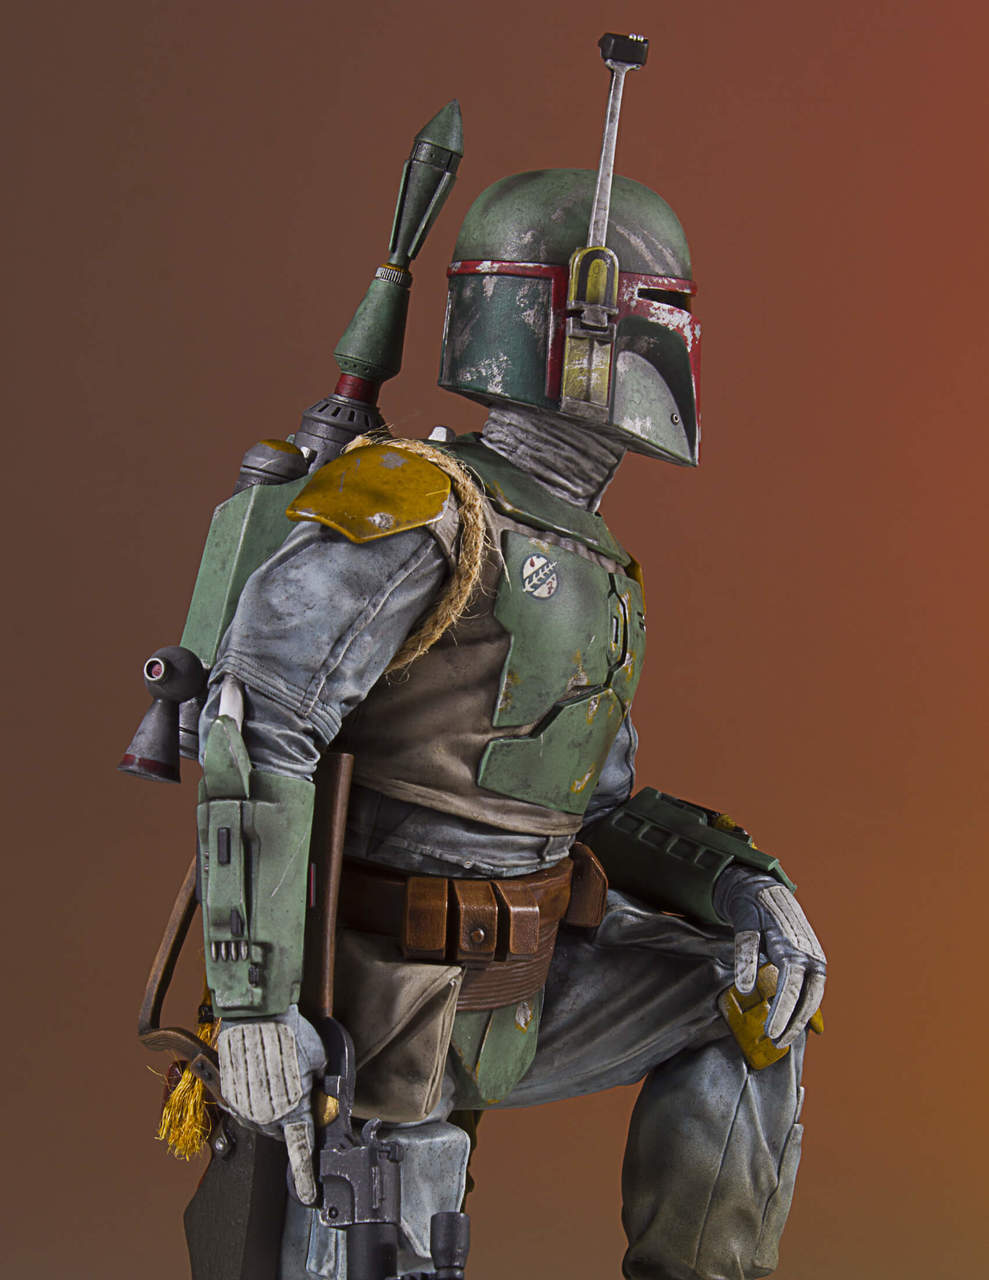 Star Wars - Boba Fett Collector’s Statue 1/8 (Gentle Giant) GaFSd6m2_o